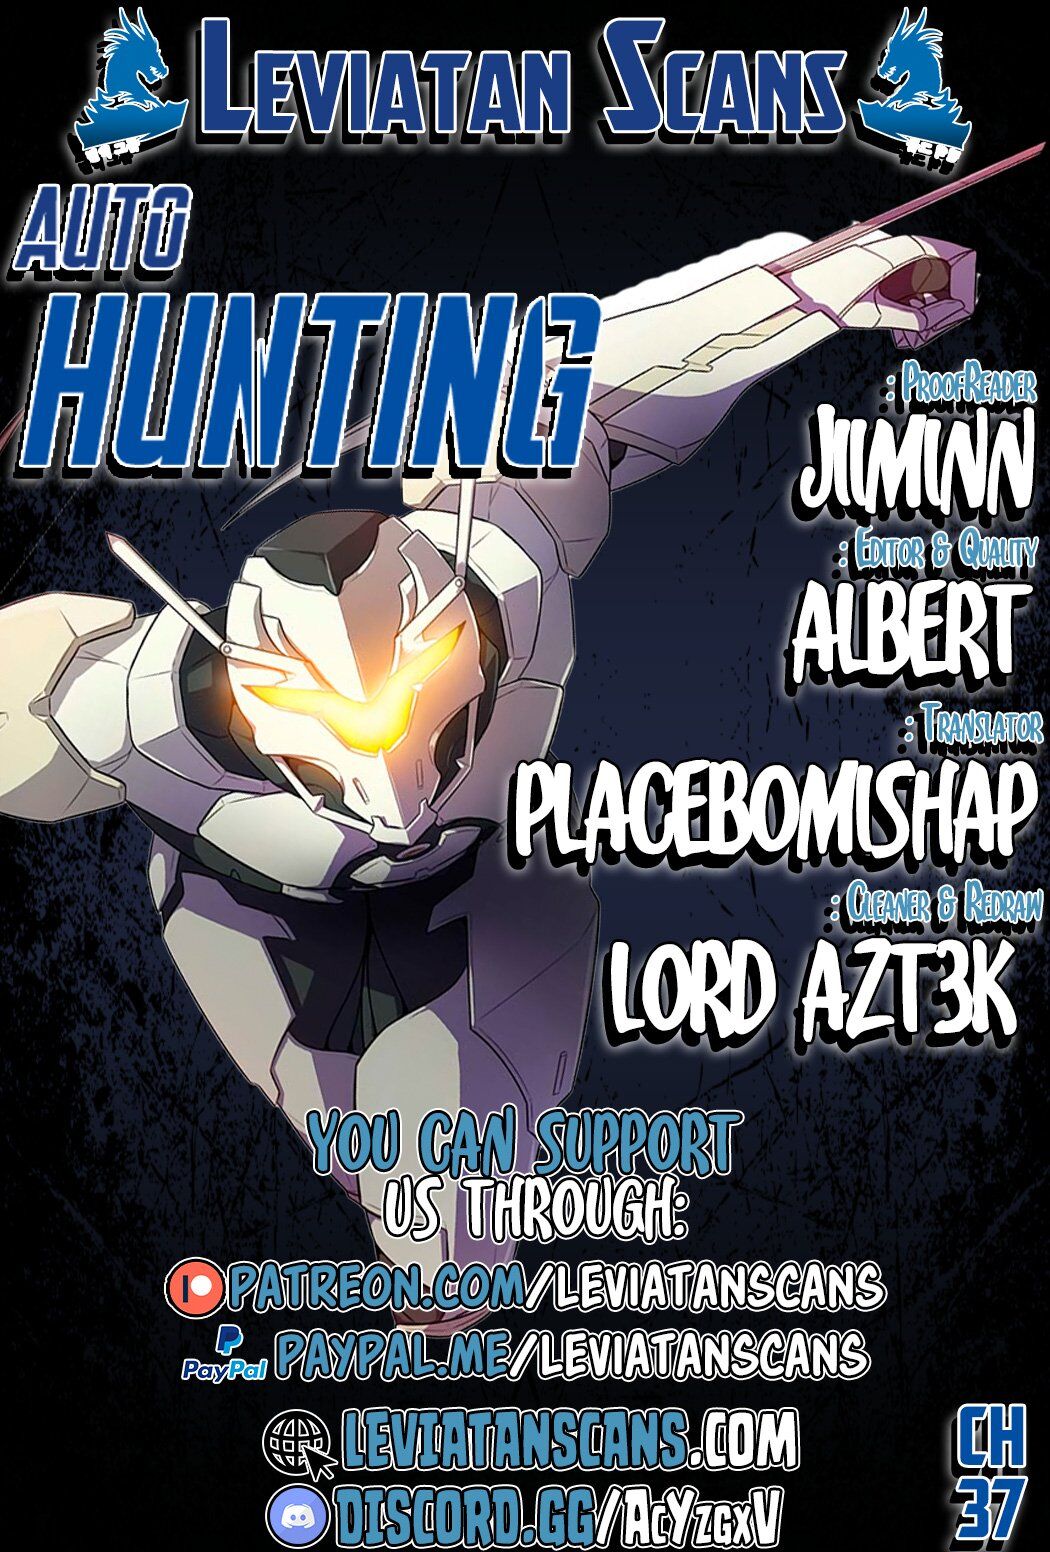 Auto Hunting Chapter 37